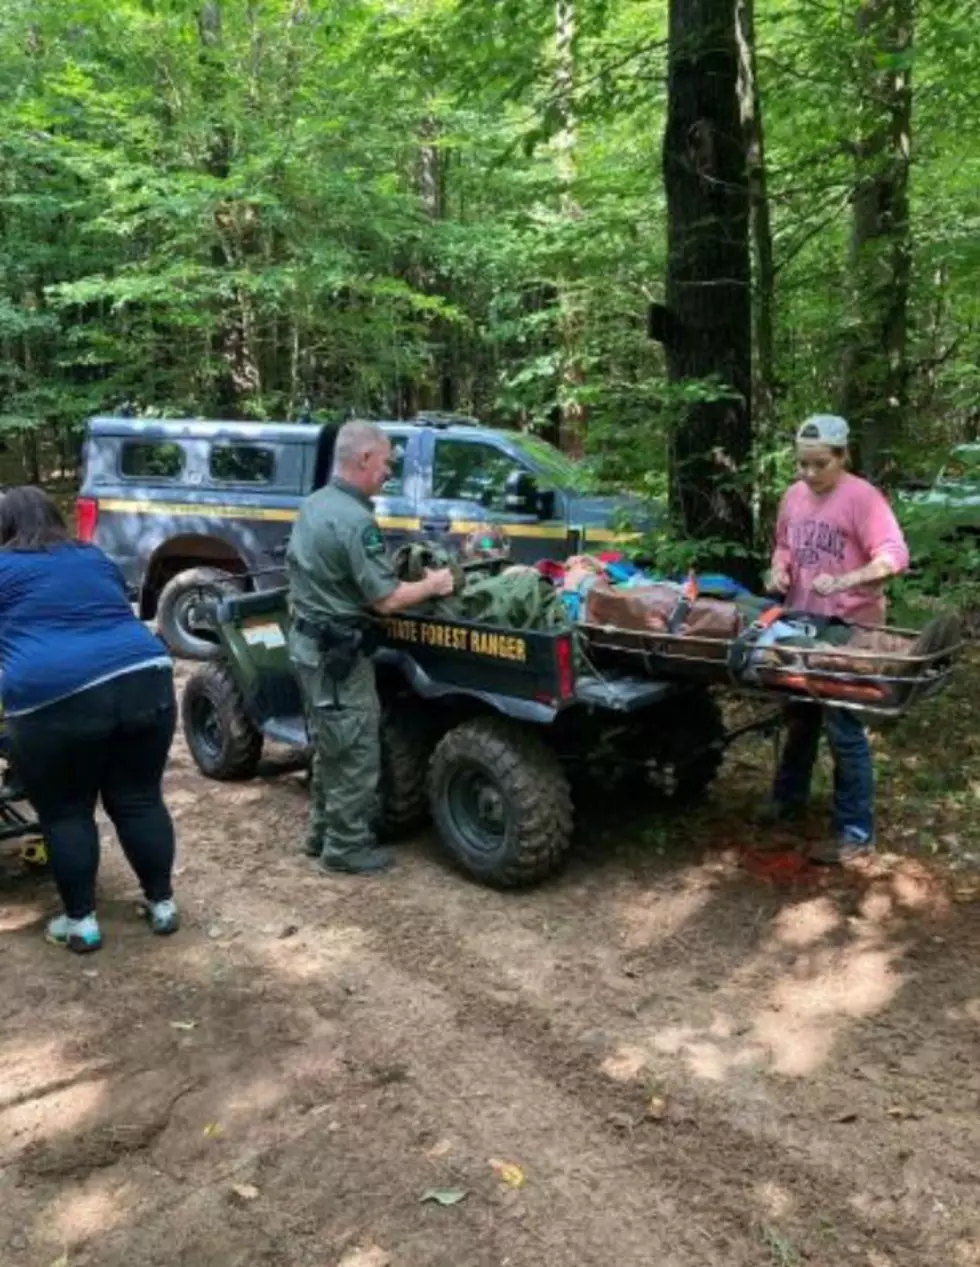 Rangers Save Woman After Horse Throws Her On New York Hiking Trail